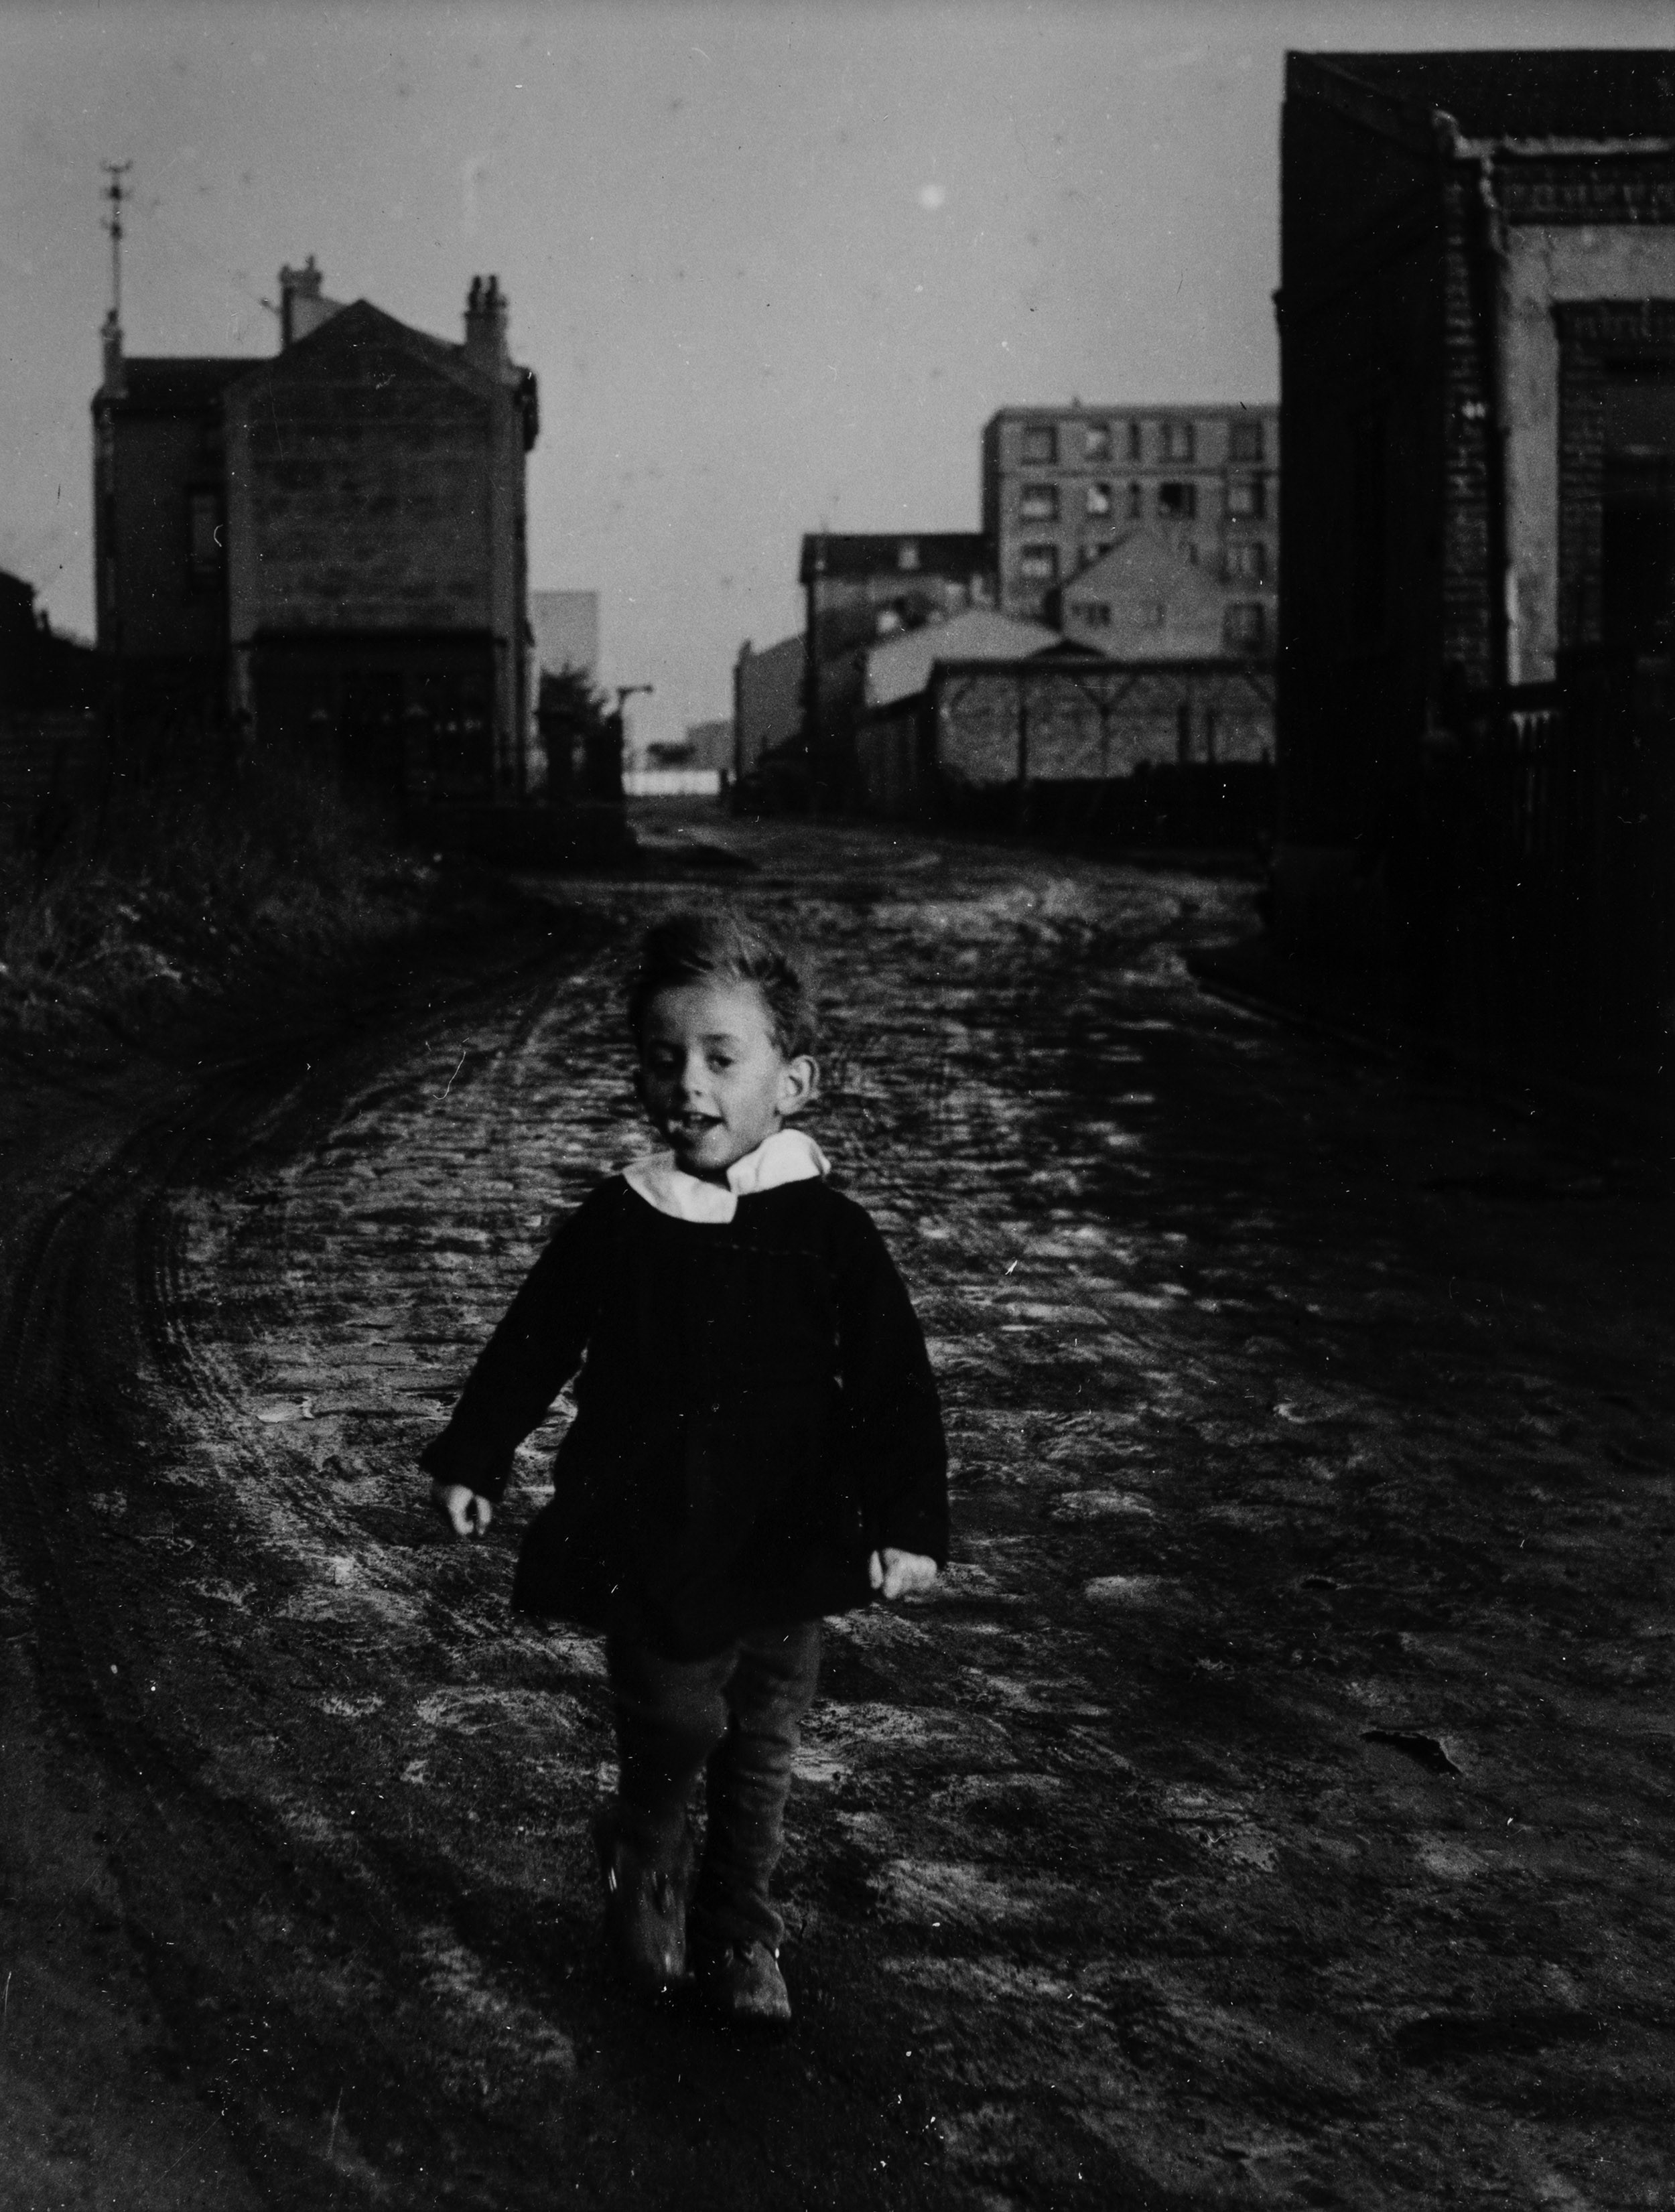 Enfant by Robert Doisneau, 1950s, printed later